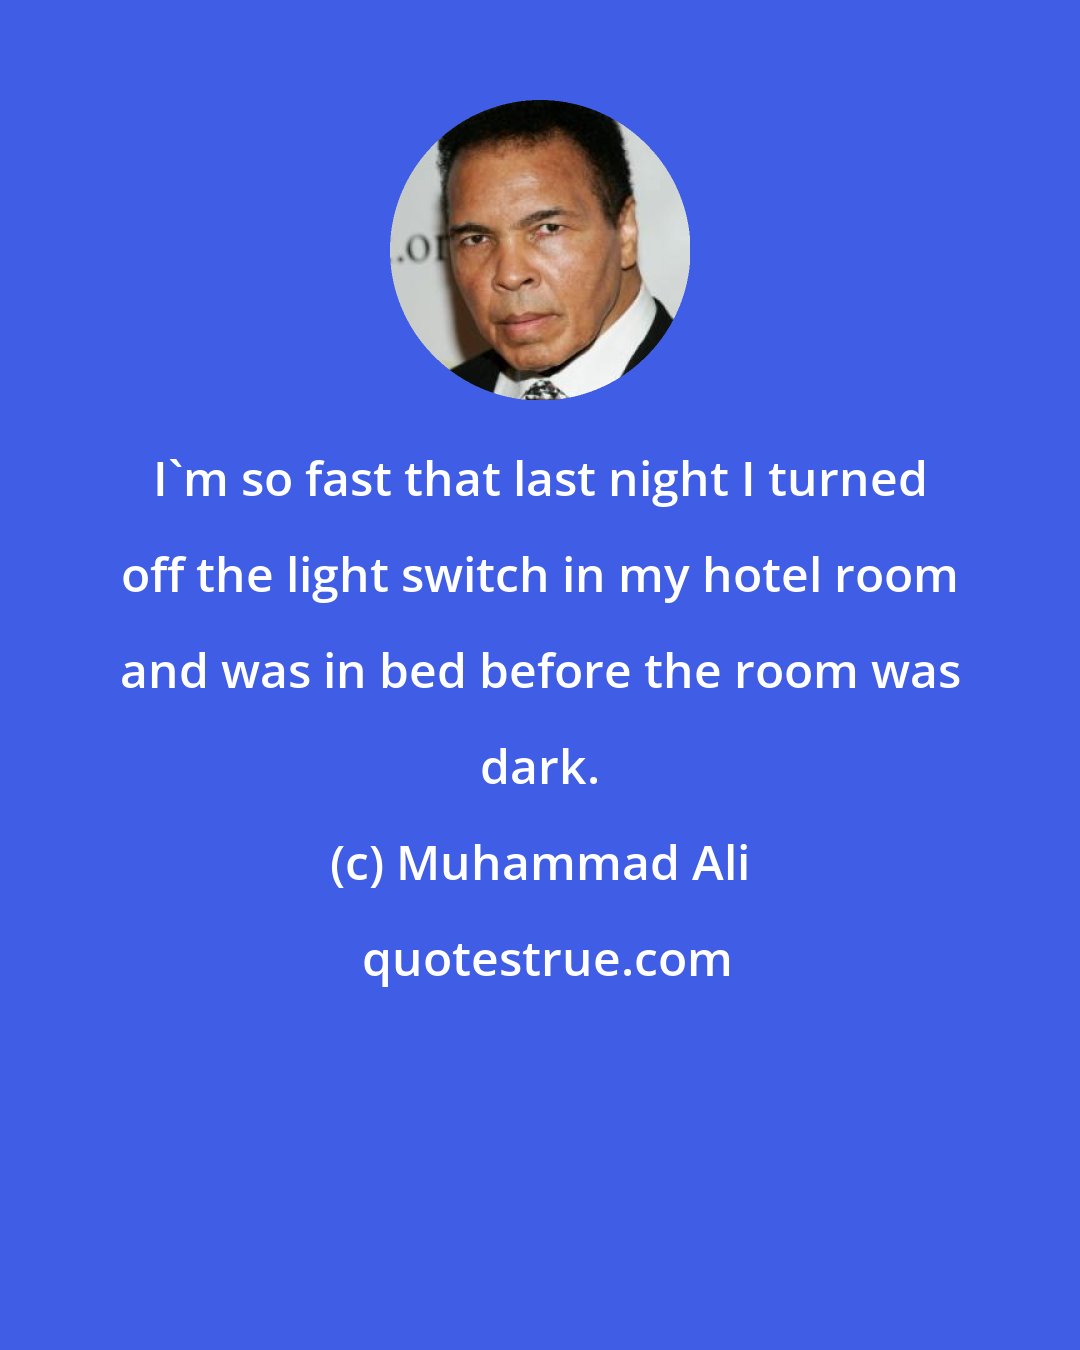 Muhammad Ali: I'm so fast that last night I turned off the light switch in my hotel room and was in bed before the room was dark.